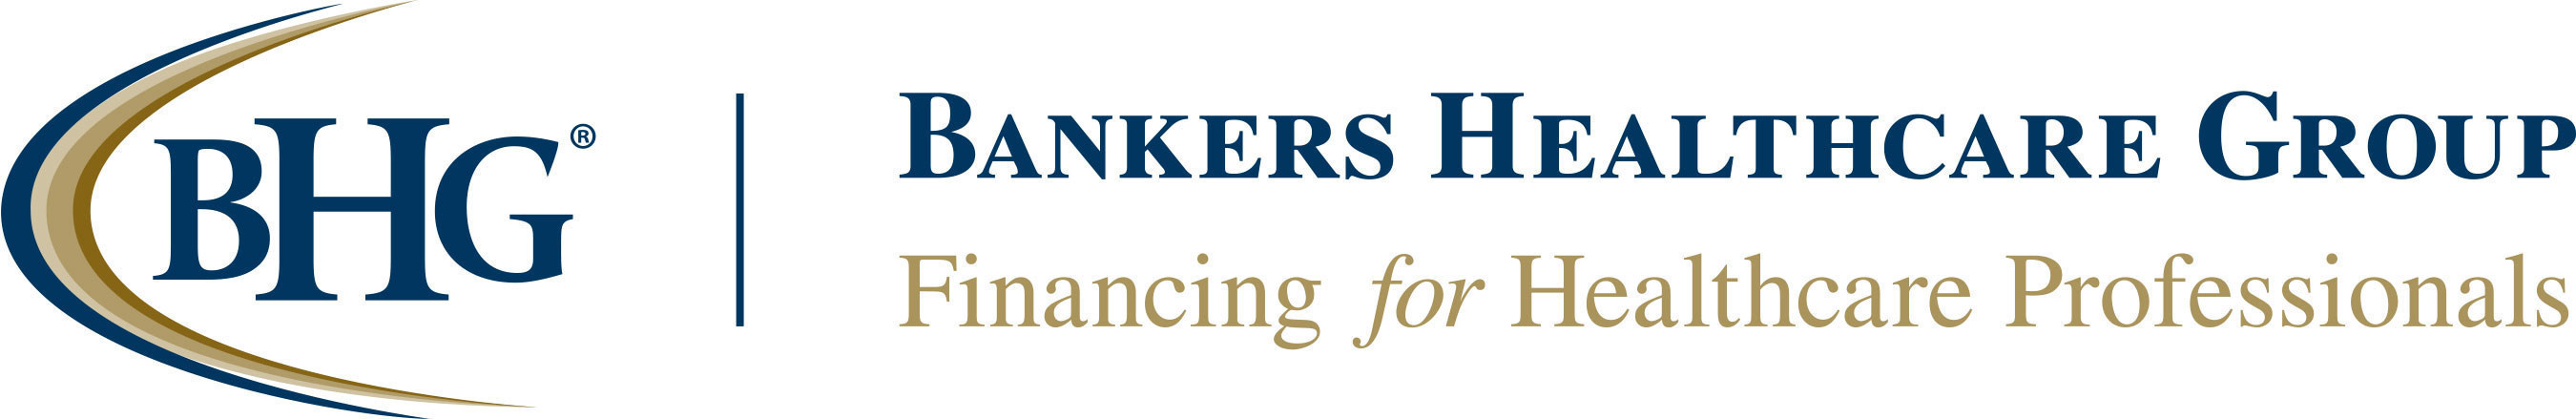 Since 2001, Bankers Healthcare Group has been committed to providing hassle-free financial solutions to healthcare professionals, including personal and commercial loans, credit cards and insurance services.